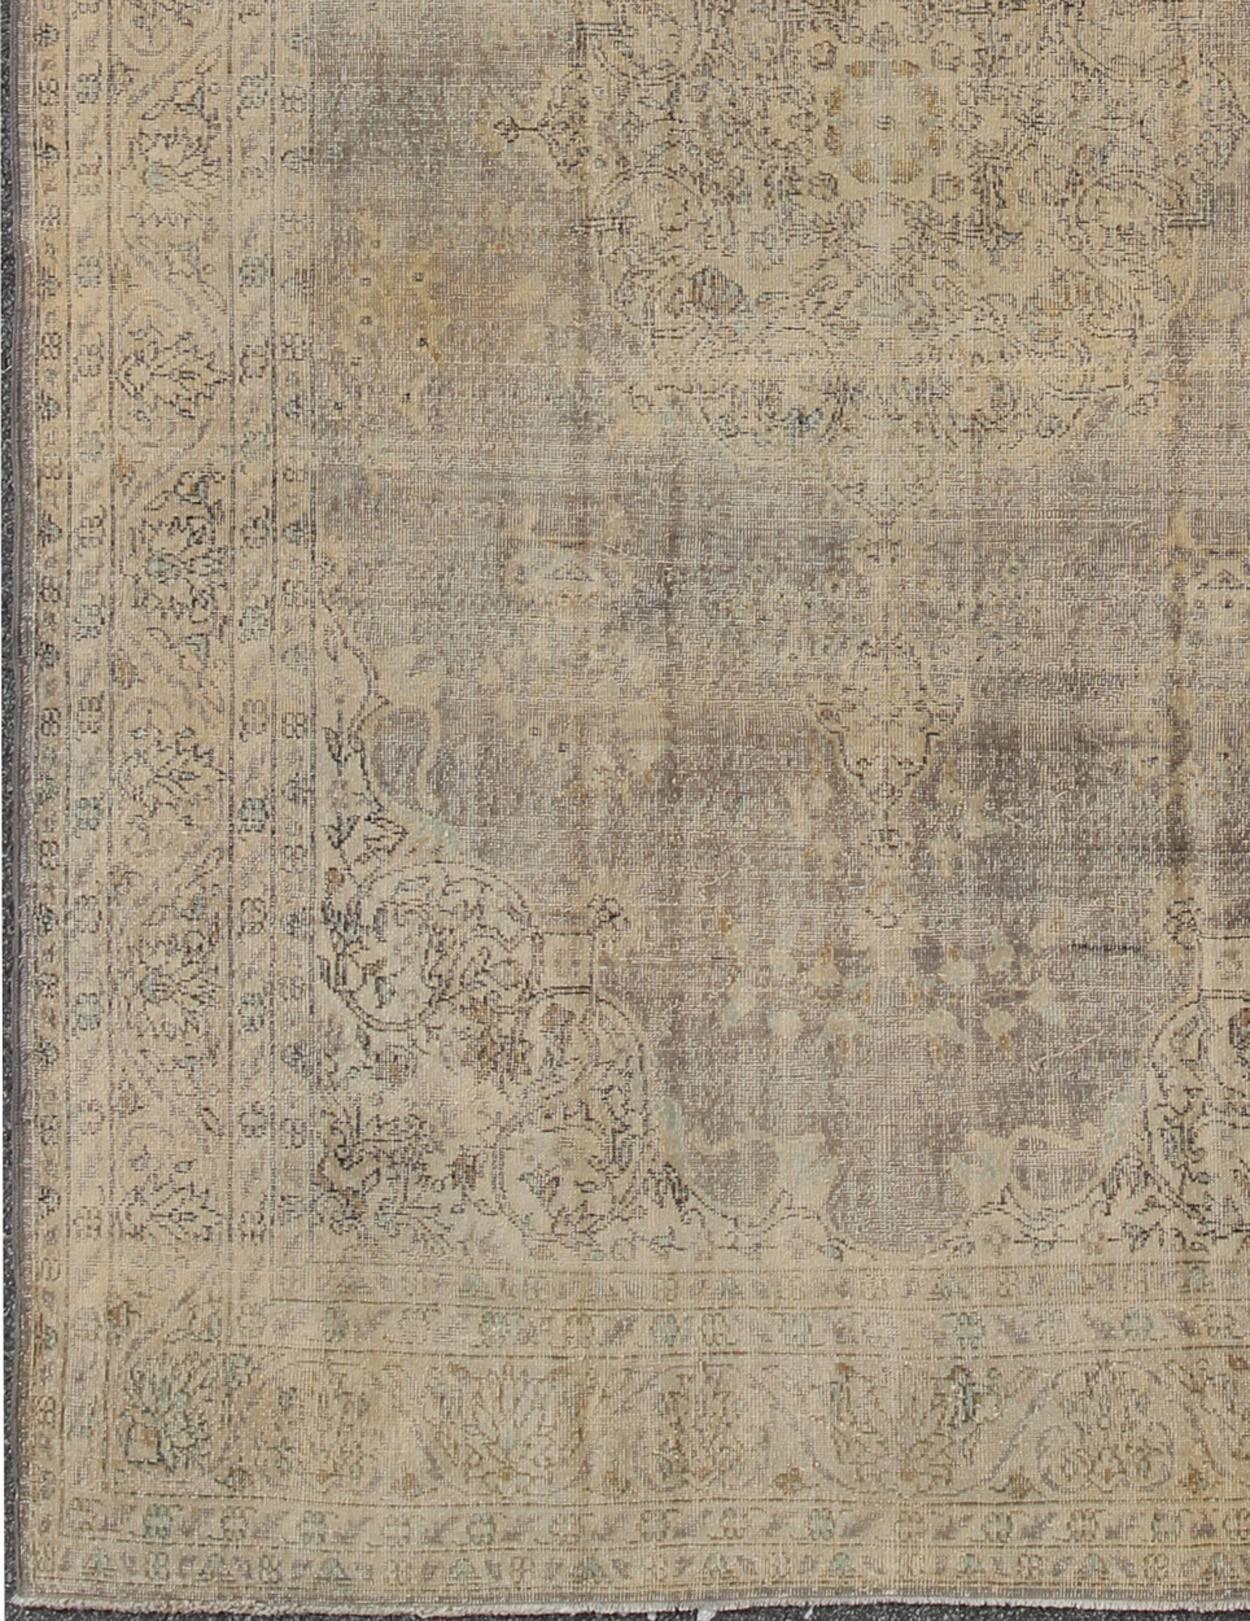 Distressed Turkish Carpet with Floral Design in Taupe, Gray, Brown and Ivory.
This vintage Turkish carpet has been neutralized to create faded pigments with a floral design. Neutral colors include many shades of taupe, gray, and ivory, with brown